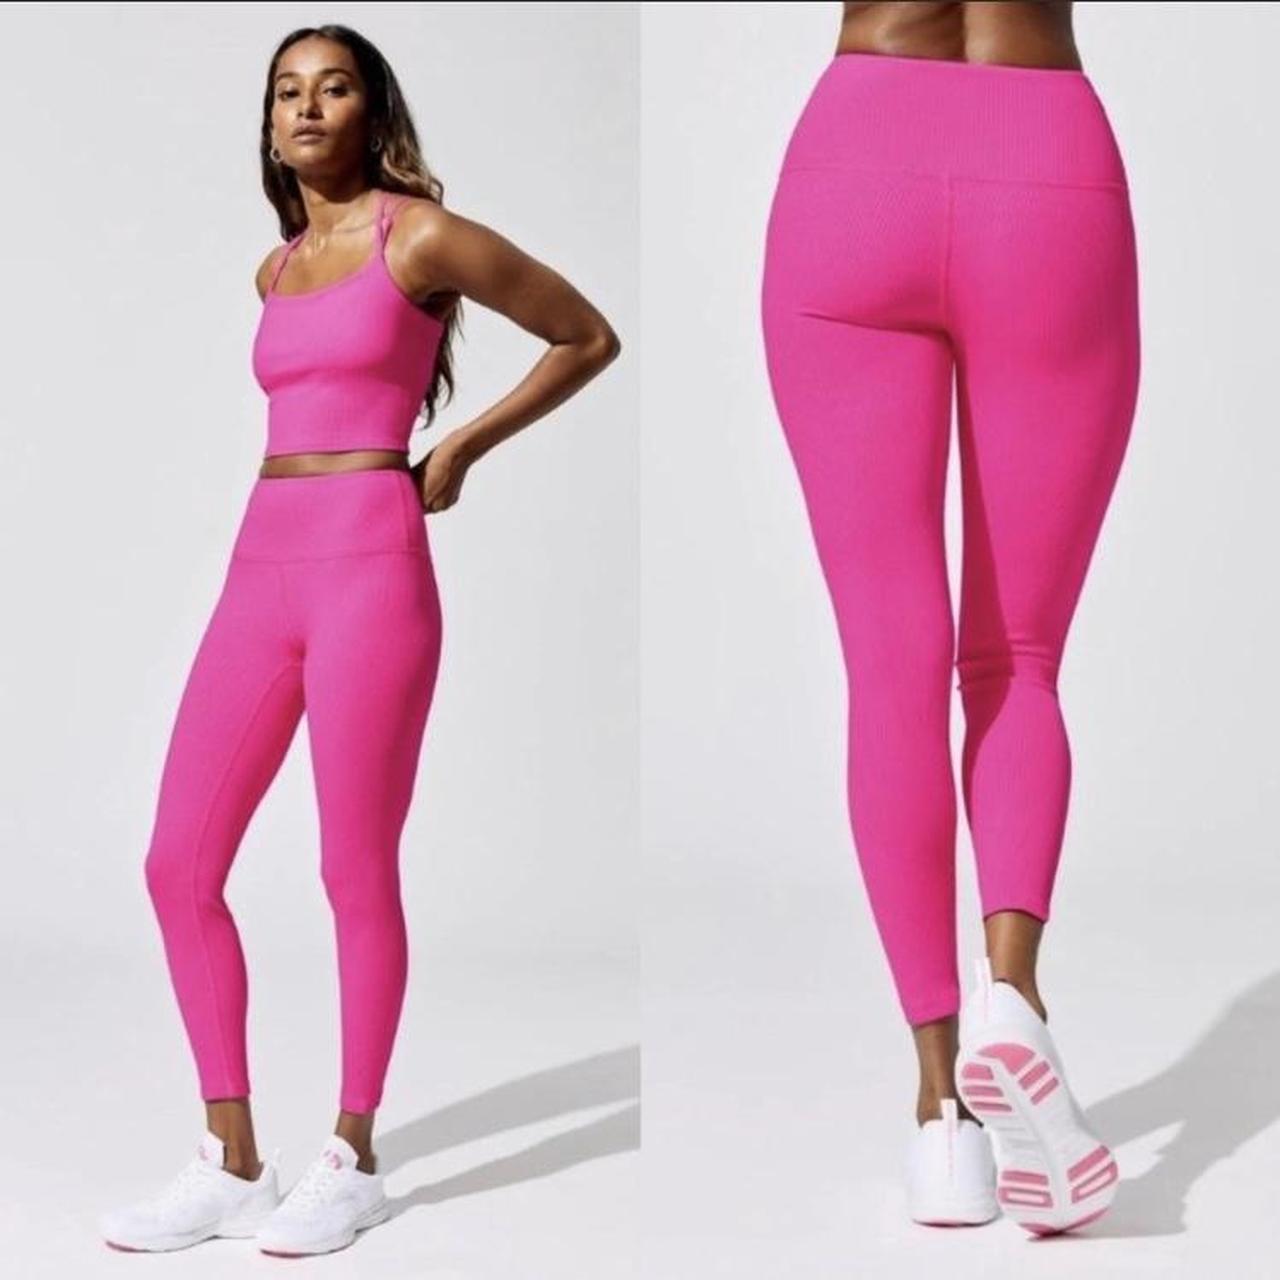 carbon38 ribbed 7/8 high waisted leggings S hot pink - Depop